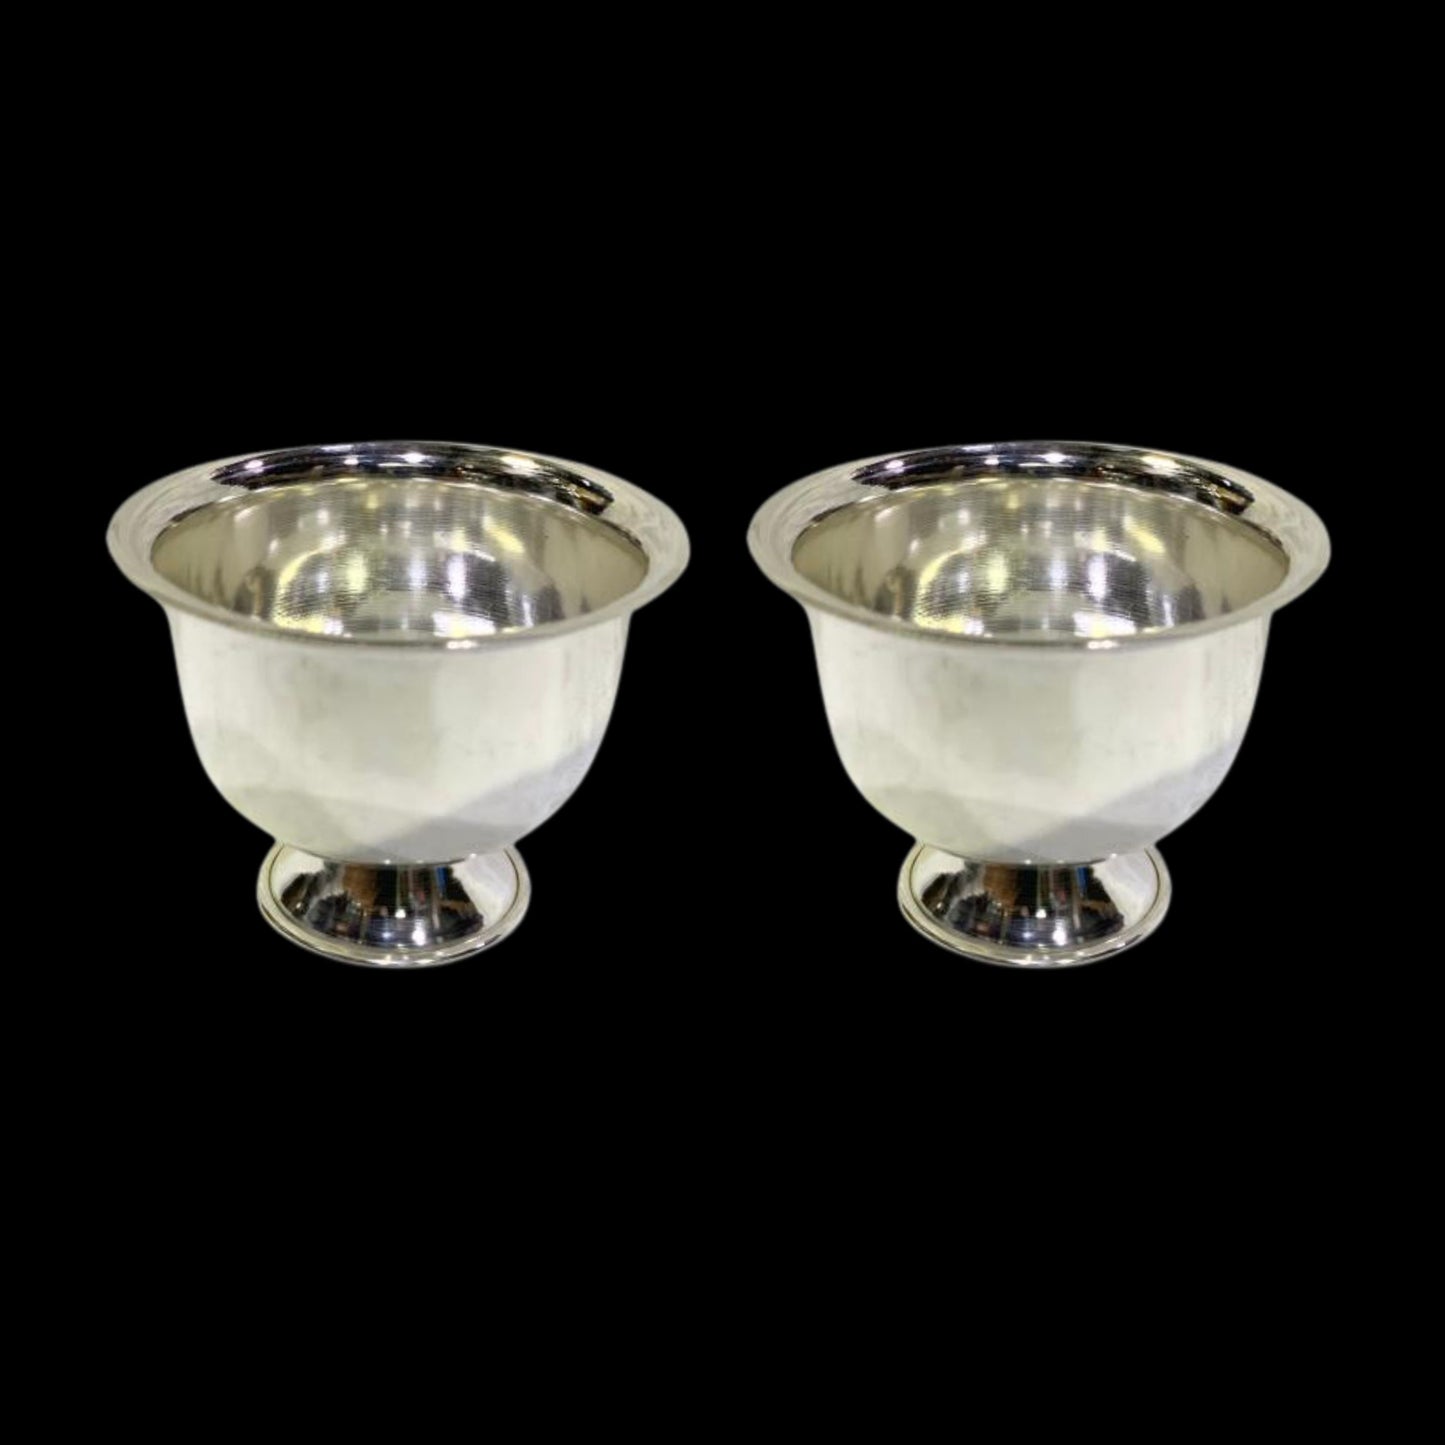 32 gms Pure Silver Padam Cups (Set Of 2) - Mirror Finished